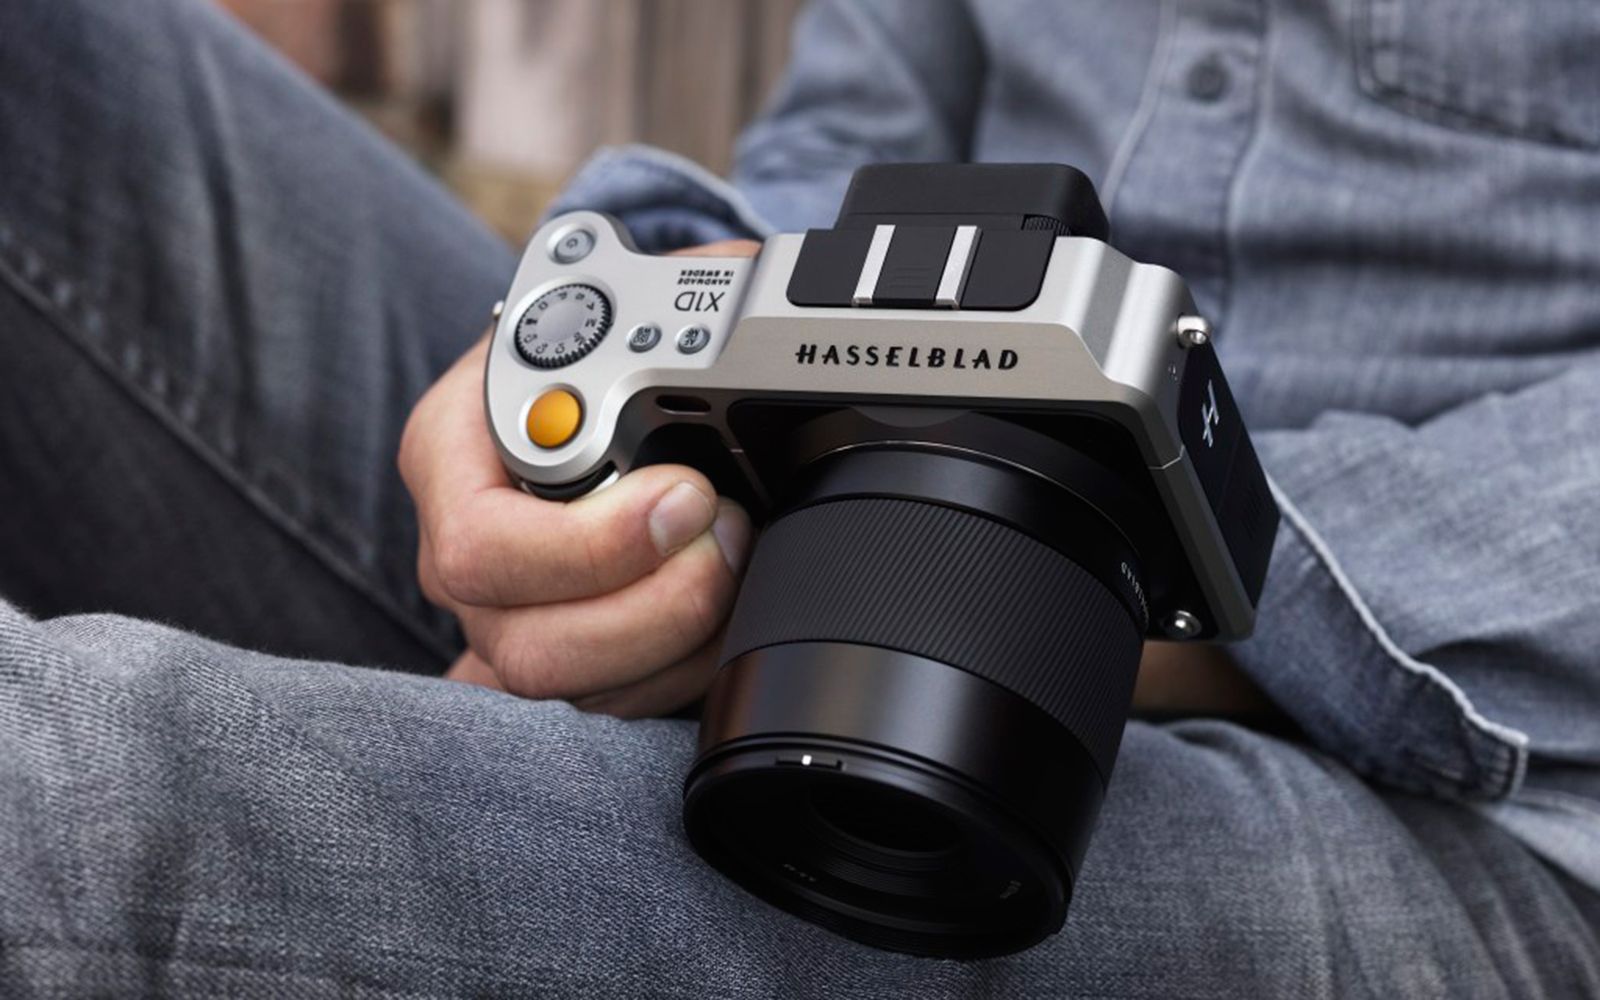 hasselblad x1d 50c is the world’s first medium format mirrorless camera image 1